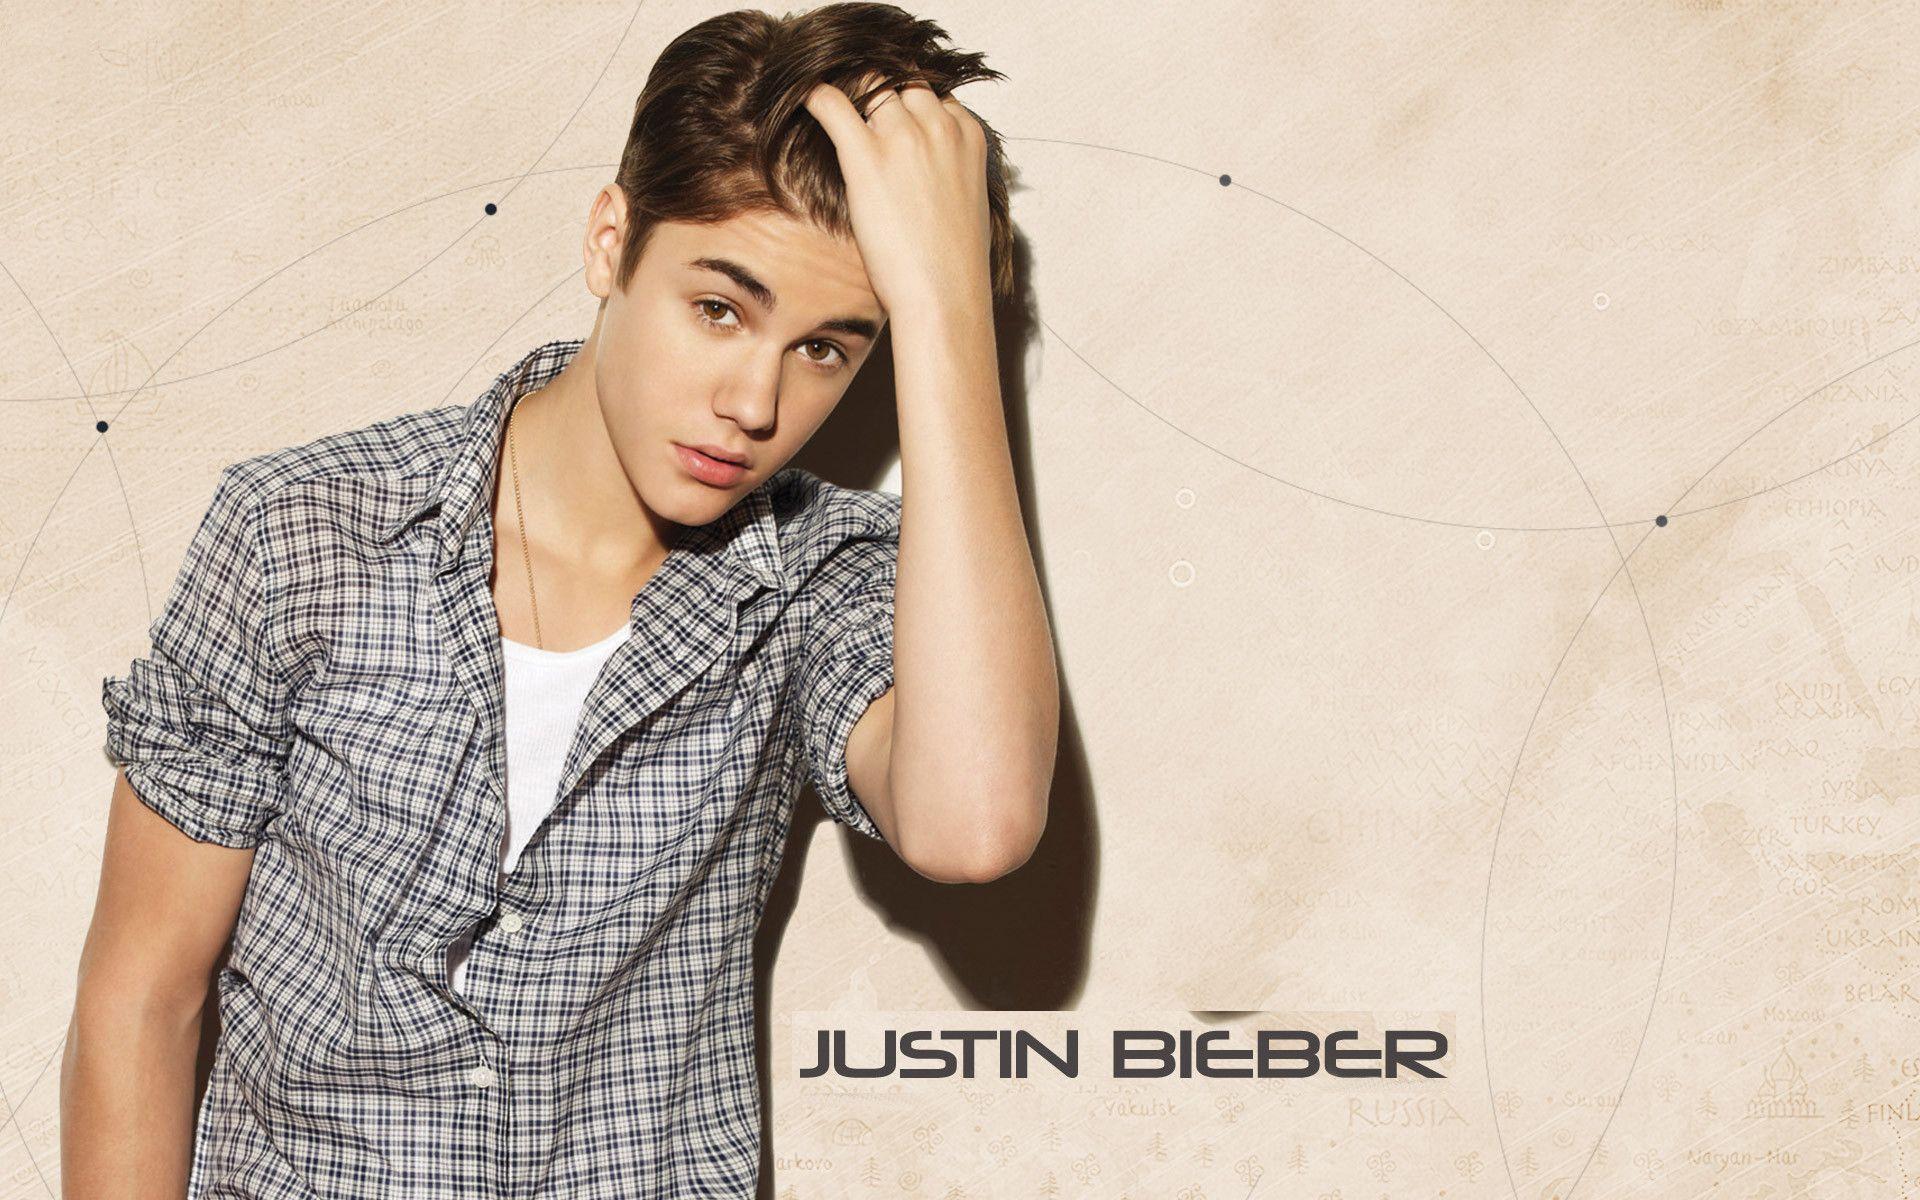 image For > Cute Justin Bieber Picture 2013